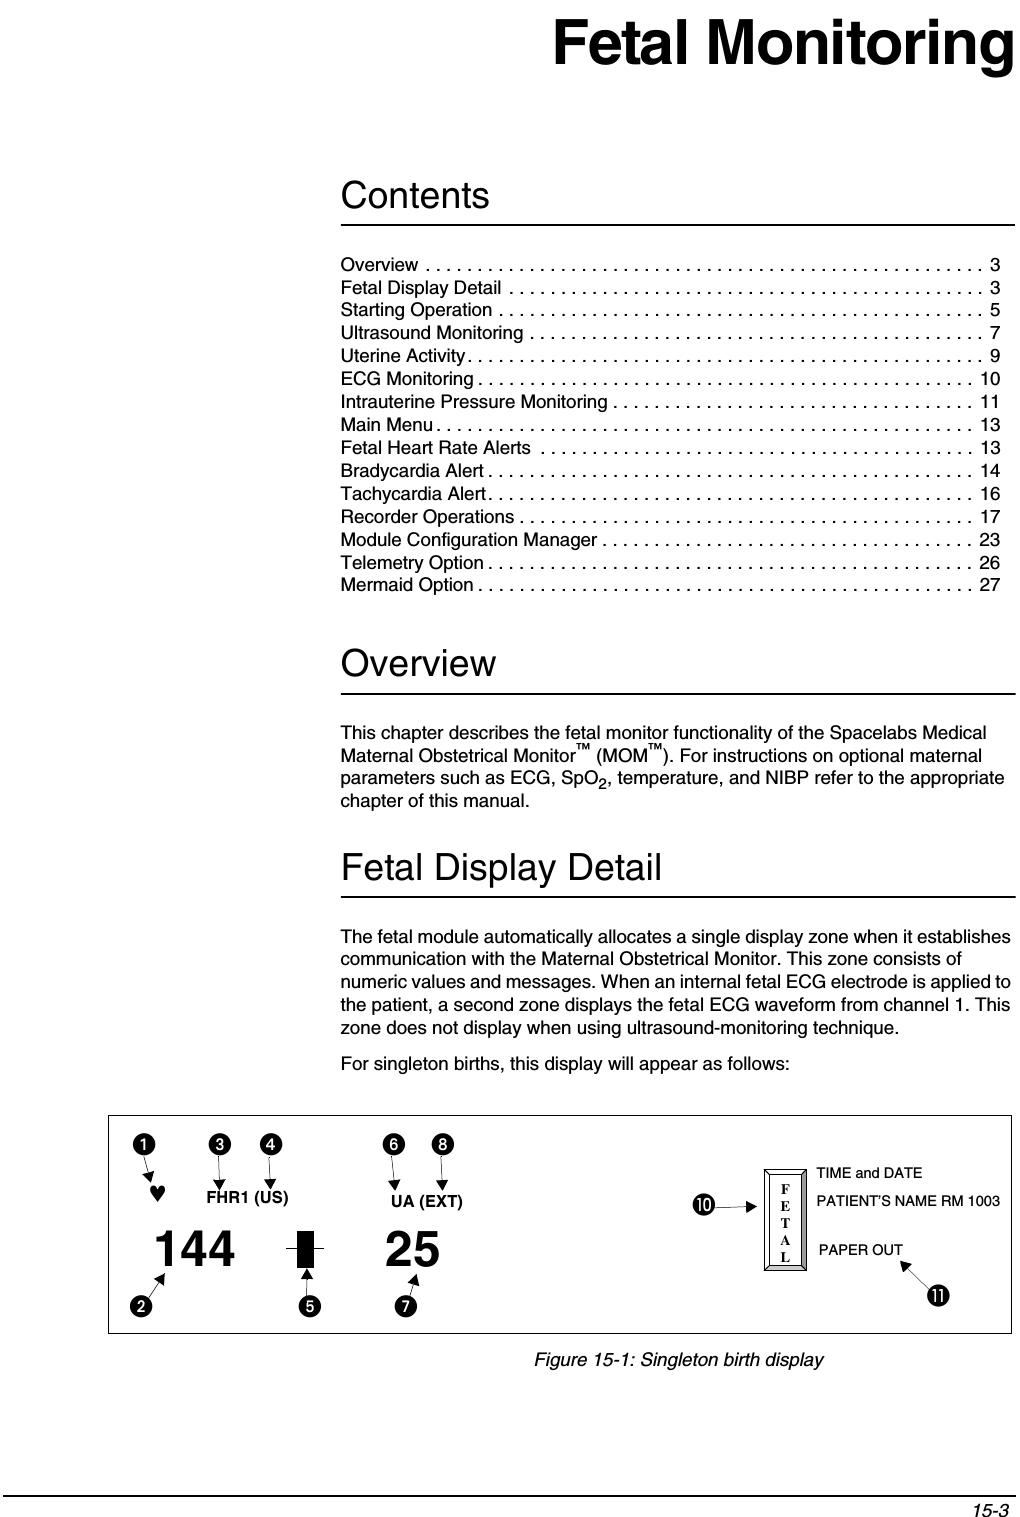 Contents15-3 Overview . . . . . . . . . . . . . . . . . . . . . . . . . . . . . . . . . . . . . . . . . . . . . . . . . . . . . . 3Fetal Display Detail . . . . . . . . . . . . . . . . . . . . . . . . . . . . . . . . . . . . . . . . . . . . . . 3Starting Operation . . . . . . . . . . . . . . . . . . . . . . . . . . . . . . . . . . . . . . . . . . . . . . . 5Ultrasound Monitoring . . . . . . . . . . . . . . . . . . . . . . . . . . . . . . . . . . . . . . . . . . . . 7Uterine Activity. . . . . . . . . . . . . . . . . . . . . . . . . . . . . . . . . . . . . . . . . . . . . . . . . . 9ECG Monitoring . . . . . . . . . . . . . . . . . . . . . . . . . . . . . . . . . . . . . . . . . . . . . . . . 10Intrauterine Pressure Monitoring . . . . . . . . . . . . . . . . . . . . . . . . . . . . . . . . . . .  11Main Menu . . . . . . . . . . . . . . . . . . . . . . . . . . . . . . . . . . . . . . . . . . . . . . . . . . . . 13Fetal Heart Rate Alerts  . . . . . . . . . . . . . . . . . . . . . . . . . . . . . . . . . . . . . . . . . . 13Bradycardia Alert . . . . . . . . . . . . . . . . . . . . . . . . . . . . . . . . . . . . . . . . . . . . . . .  14Tachycardia Alert. . . . . . . . . . . . . . . . . . . . . . . . . . . . . . . . . . . . . . . . . . . . . . . 16Recorder Operations . . . . . . . . . . . . . . . . . . . . . . . . . . . . . . . . . . . . . . . . . . . .  17Module Configuration Manager . . . . . . . . . . . . . . . . . . . . . . . . . . . . . . . . . . . .  23Telemetry Option . . . . . . . . . . . . . . . . . . . . . . . . . . . . . . . . . . . . . . . . . . . . . . . 26Mermaid Option . . . . . . . . . . . . . . . . . . . . . . . . . . . . . . . . . . . . . . . . . . . . . . . . 27Fetal MonitoringOverviewThis chapter describes the fetal monitor functionality of the Spacelabs Medical Maternal Obstetrical Monitor™ (MOM™). For instructions on optional maternal parameters such as ECG, SpO2, temperature, and NIBP refer to the appropriate chapter of this manual.Fetal Display DetailThe fetal module automatically allocates a single display zone when it establishes communication with the Maternal Obstetrical Monitor. This zone consists of numeric values and messages. When an internal fetal ECG electrode is applied to the patient, a second zone displays the fetal ECG waveform from channel 1. This zone does not display when using ultrasound-monitoring technique. For singleton births, this display will appear as follows:Figure 15-1: Singleton birth displayFETAL67FHR1  (US)PATIENT’S NAMEROOM 1003144UC  (EXT)ALERT  ON♥144FHR1 (US)25UA (EXT)✑✓✑✓TIME and DATEPATIENT’S NAME RM 1003PAPER OUTᕡᕣᕤ ᕦᕨµ¸ᕧᕥᕢ